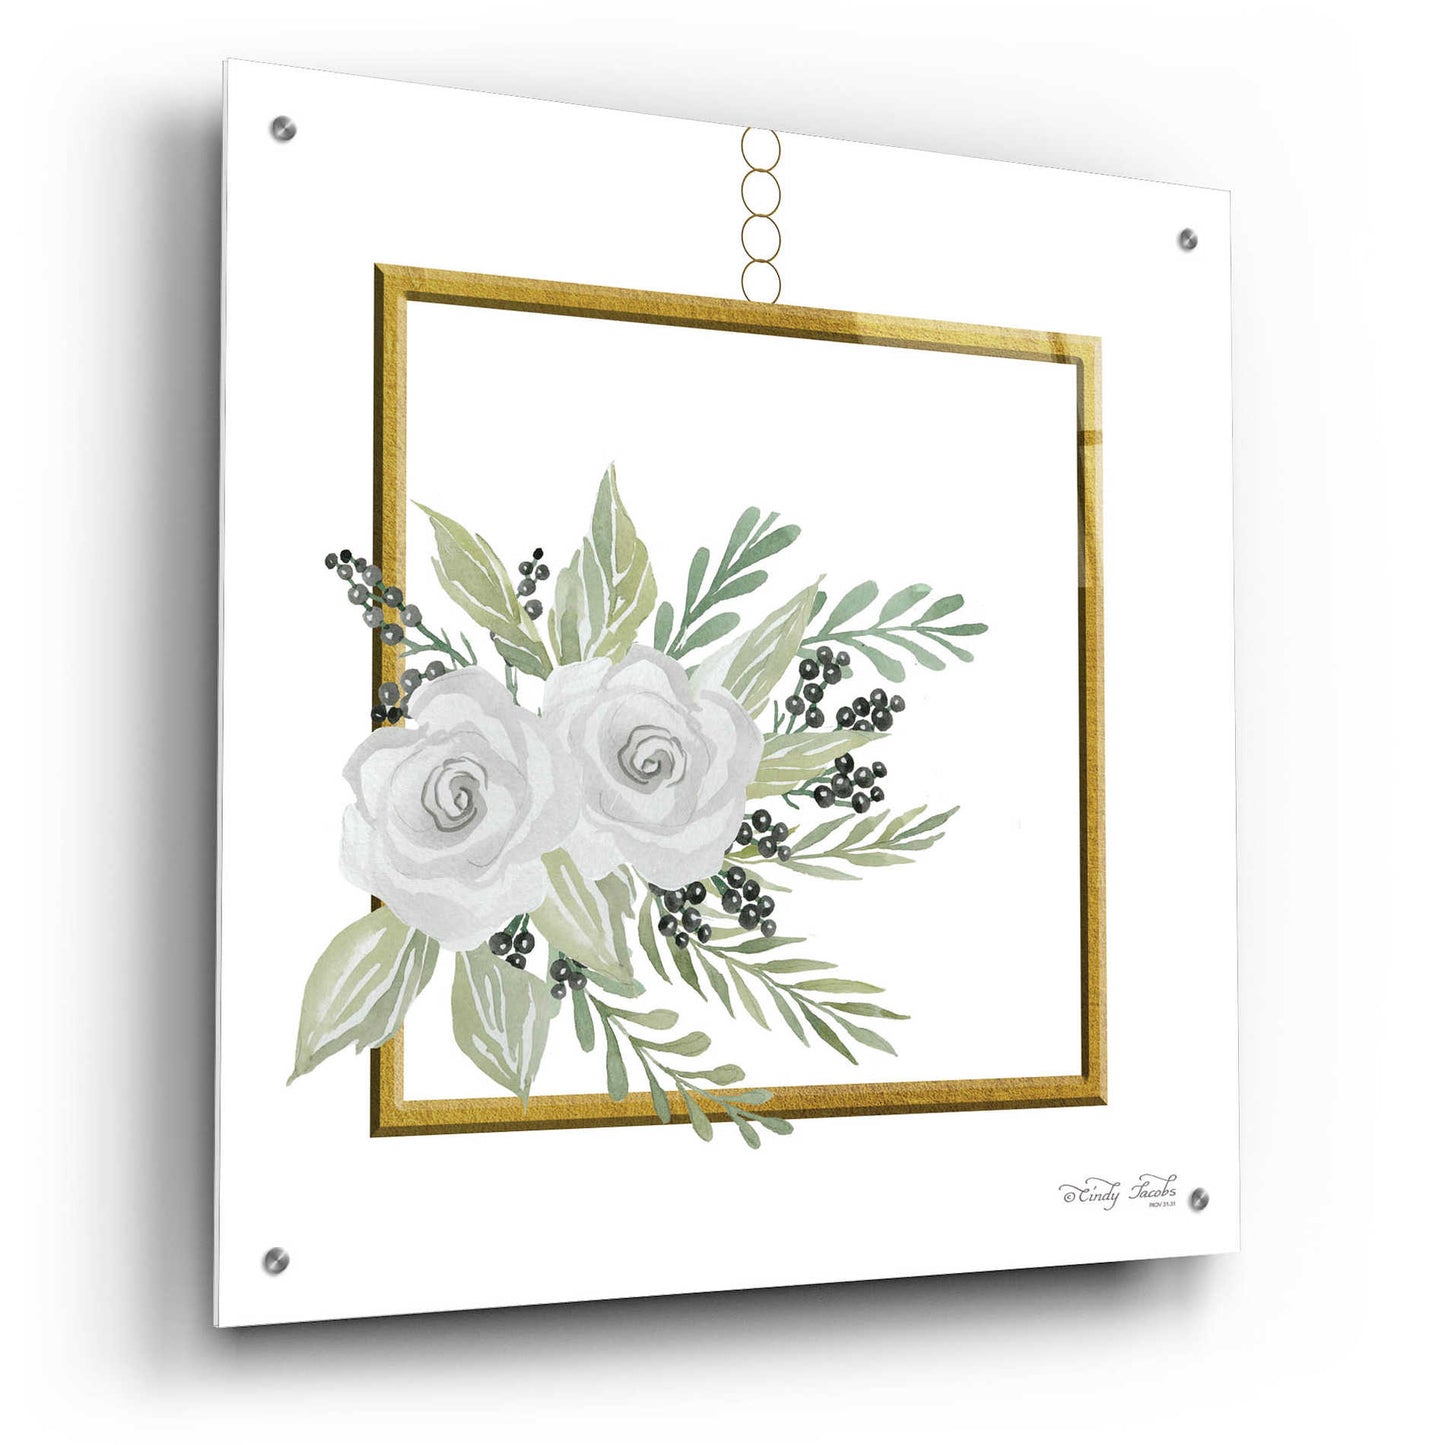 Epic Art 'Geometric Square Muted Floral' by Cindy Jacobs, Acrylic Glass Wall Art,24x24